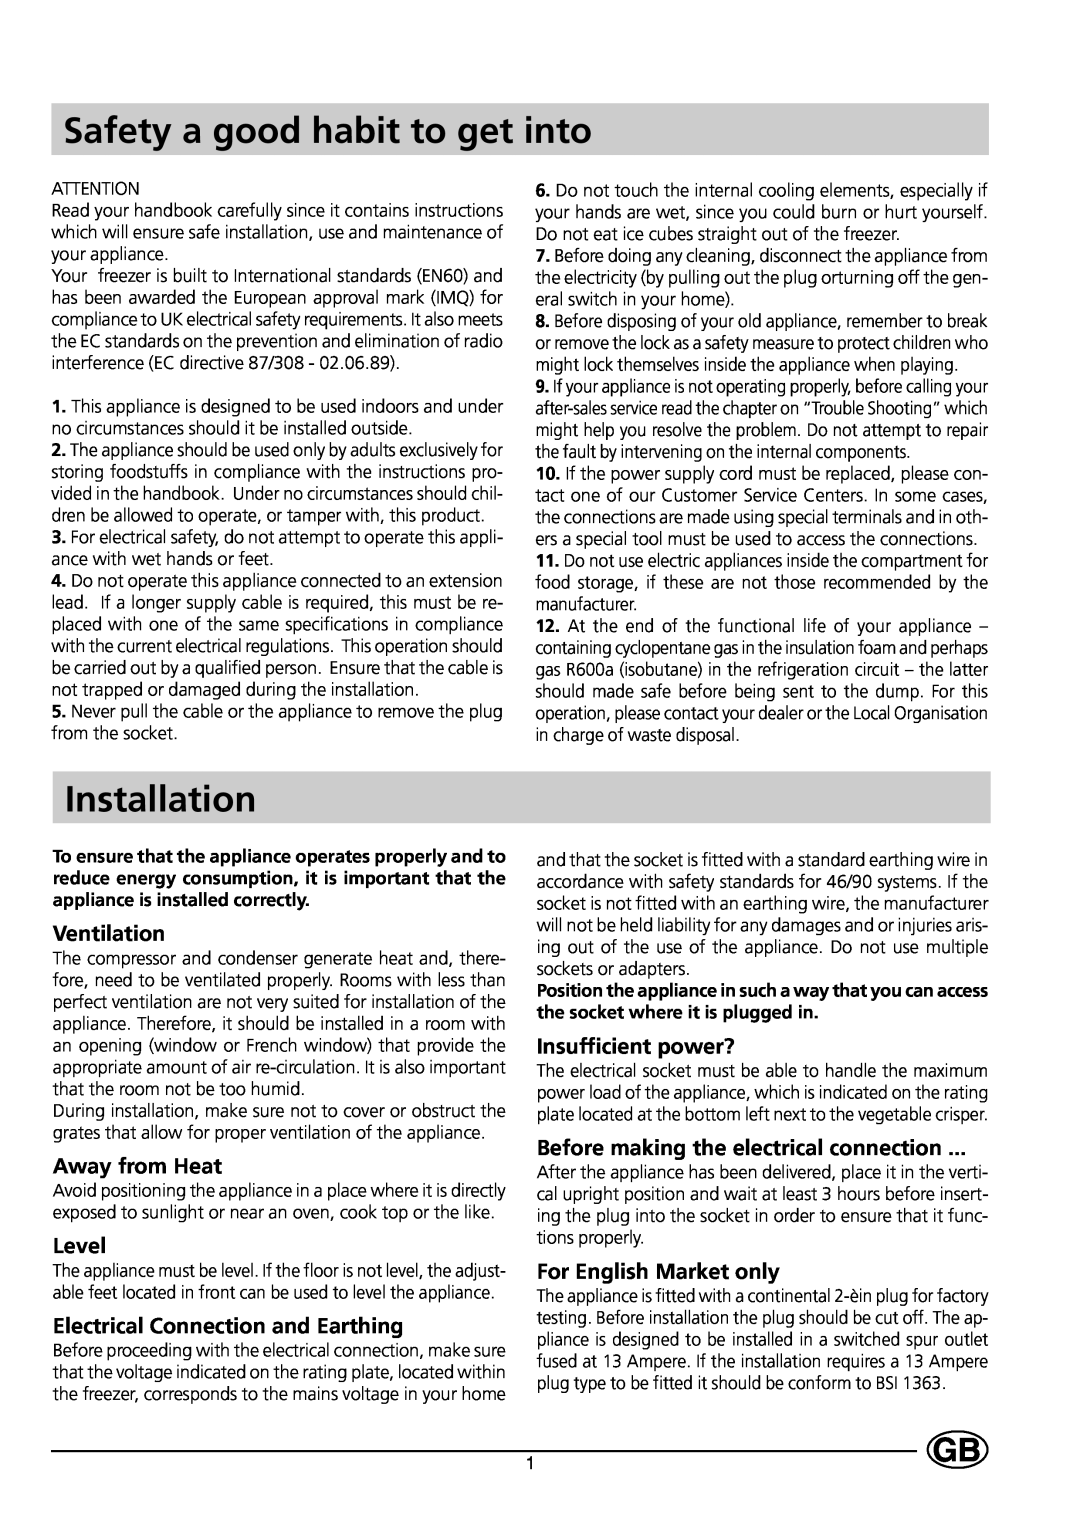 Indesit GSF 120 UK Safety a good habit to get into, Installation, Ventilation, Away from Heat, Level, Insufficient power? 